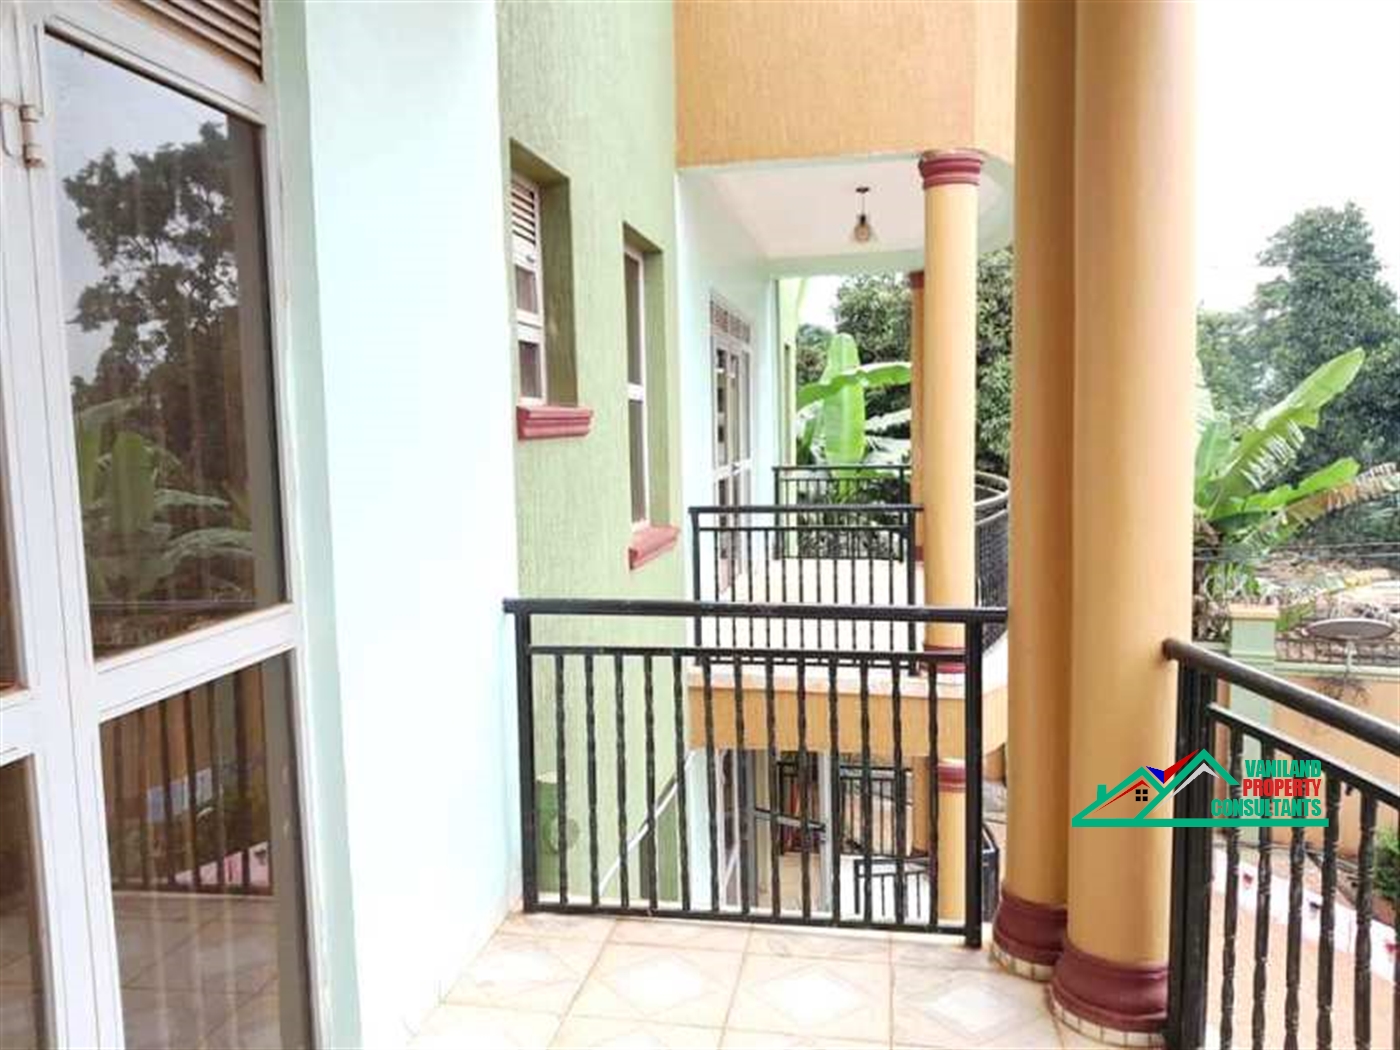 Duplex for rent in Mbalwa Wakiso